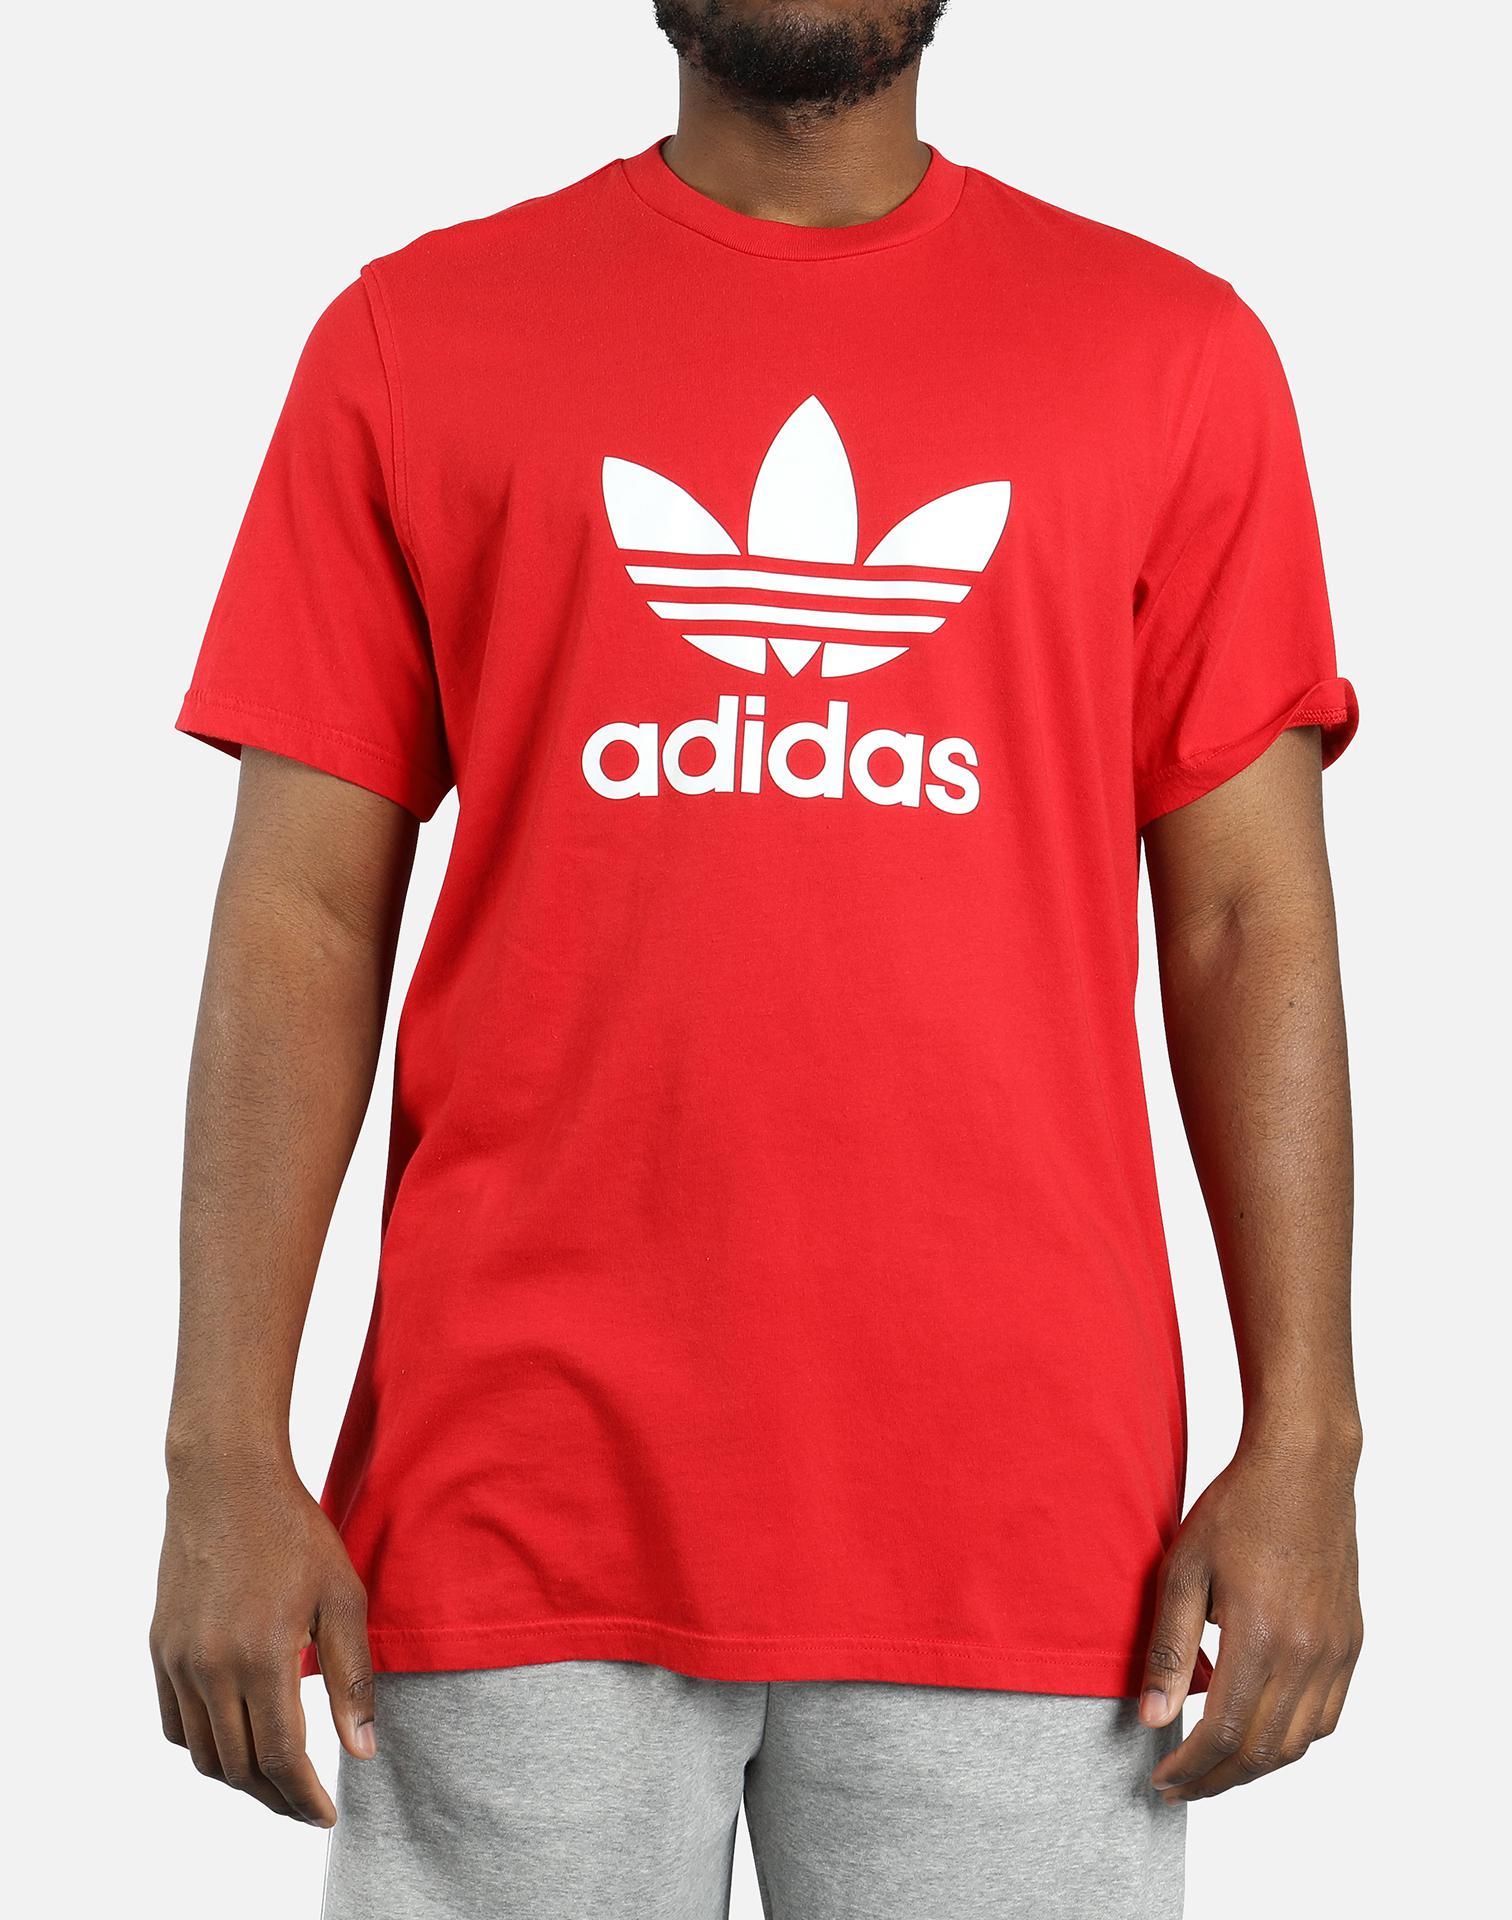 adidas Rubber Originals Trefoil Graphic T-shirt in Scarlet (Red) for